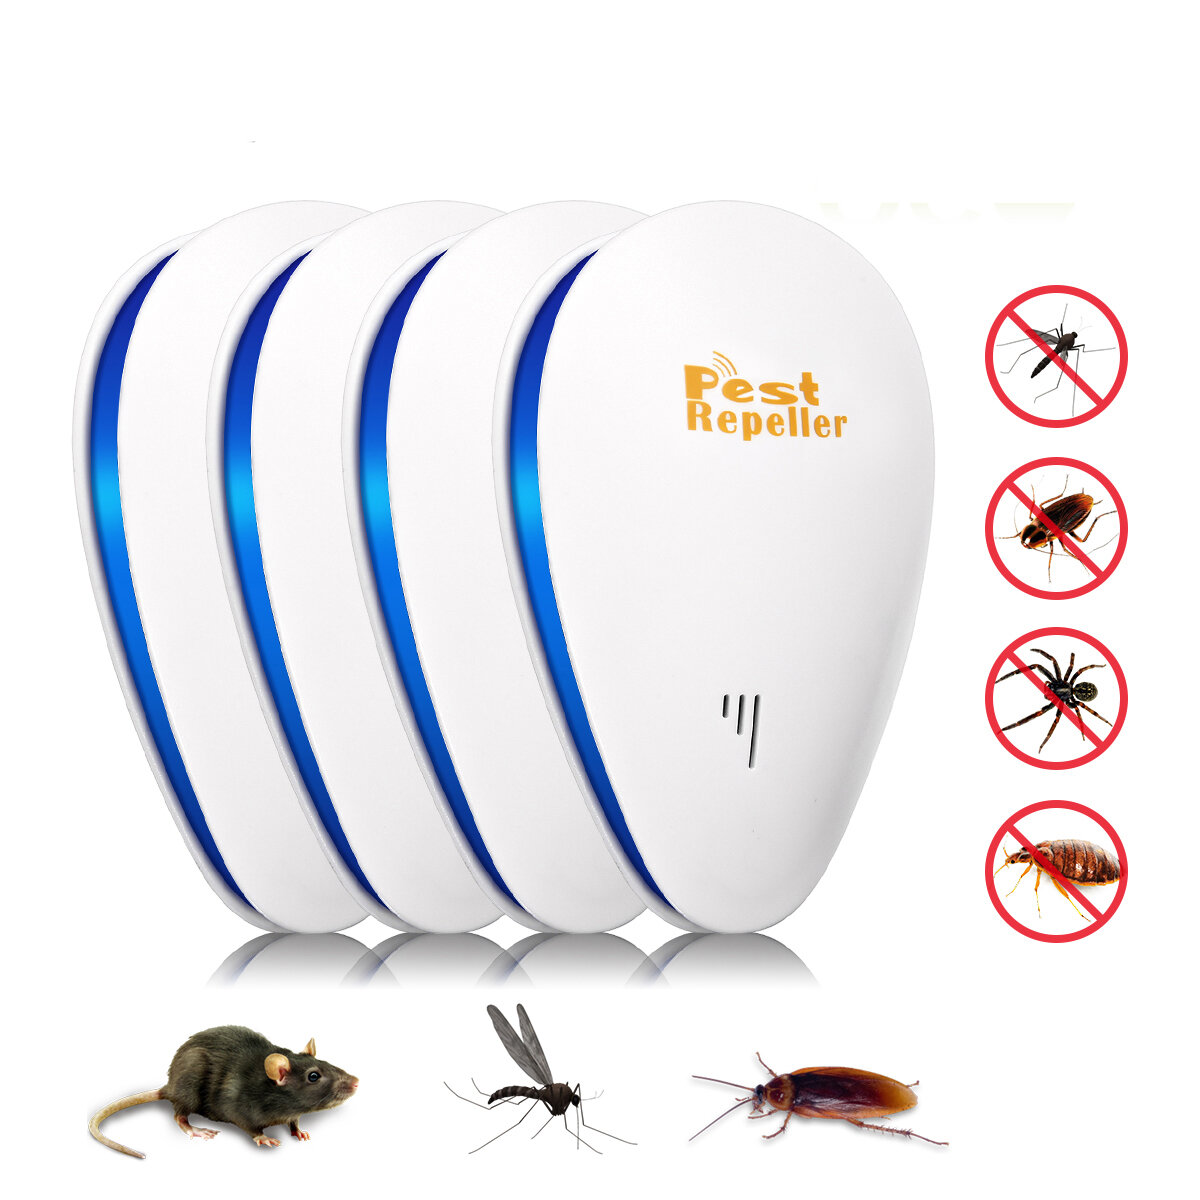 CHARMINER 4PCS Water droplet-shaped Ultrasonic Electronic Mosquito Repellent with Plug Frequency Repeller Cockroach Repeller for Home Outdoor